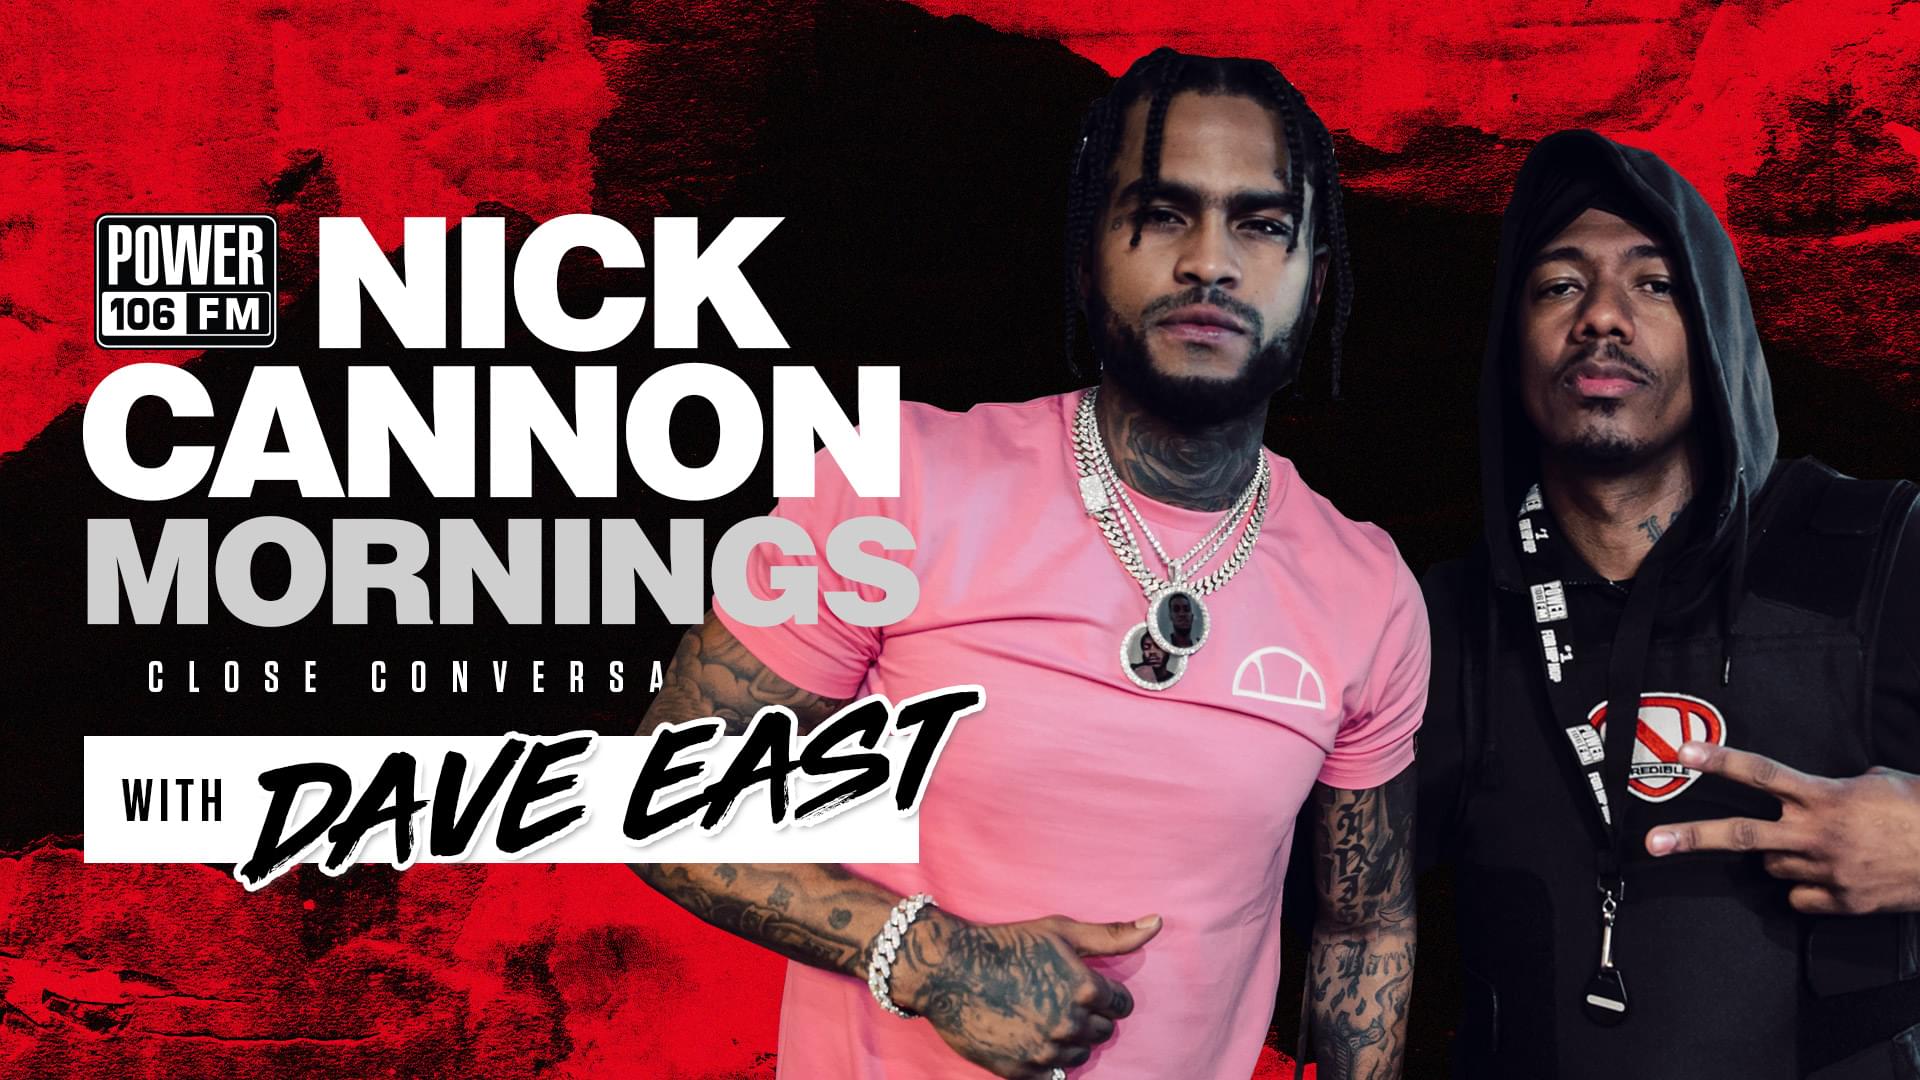 Dave East On Upcoming Album ‘Survival’, Names Top 5 Rappers, & Casting As Method Man